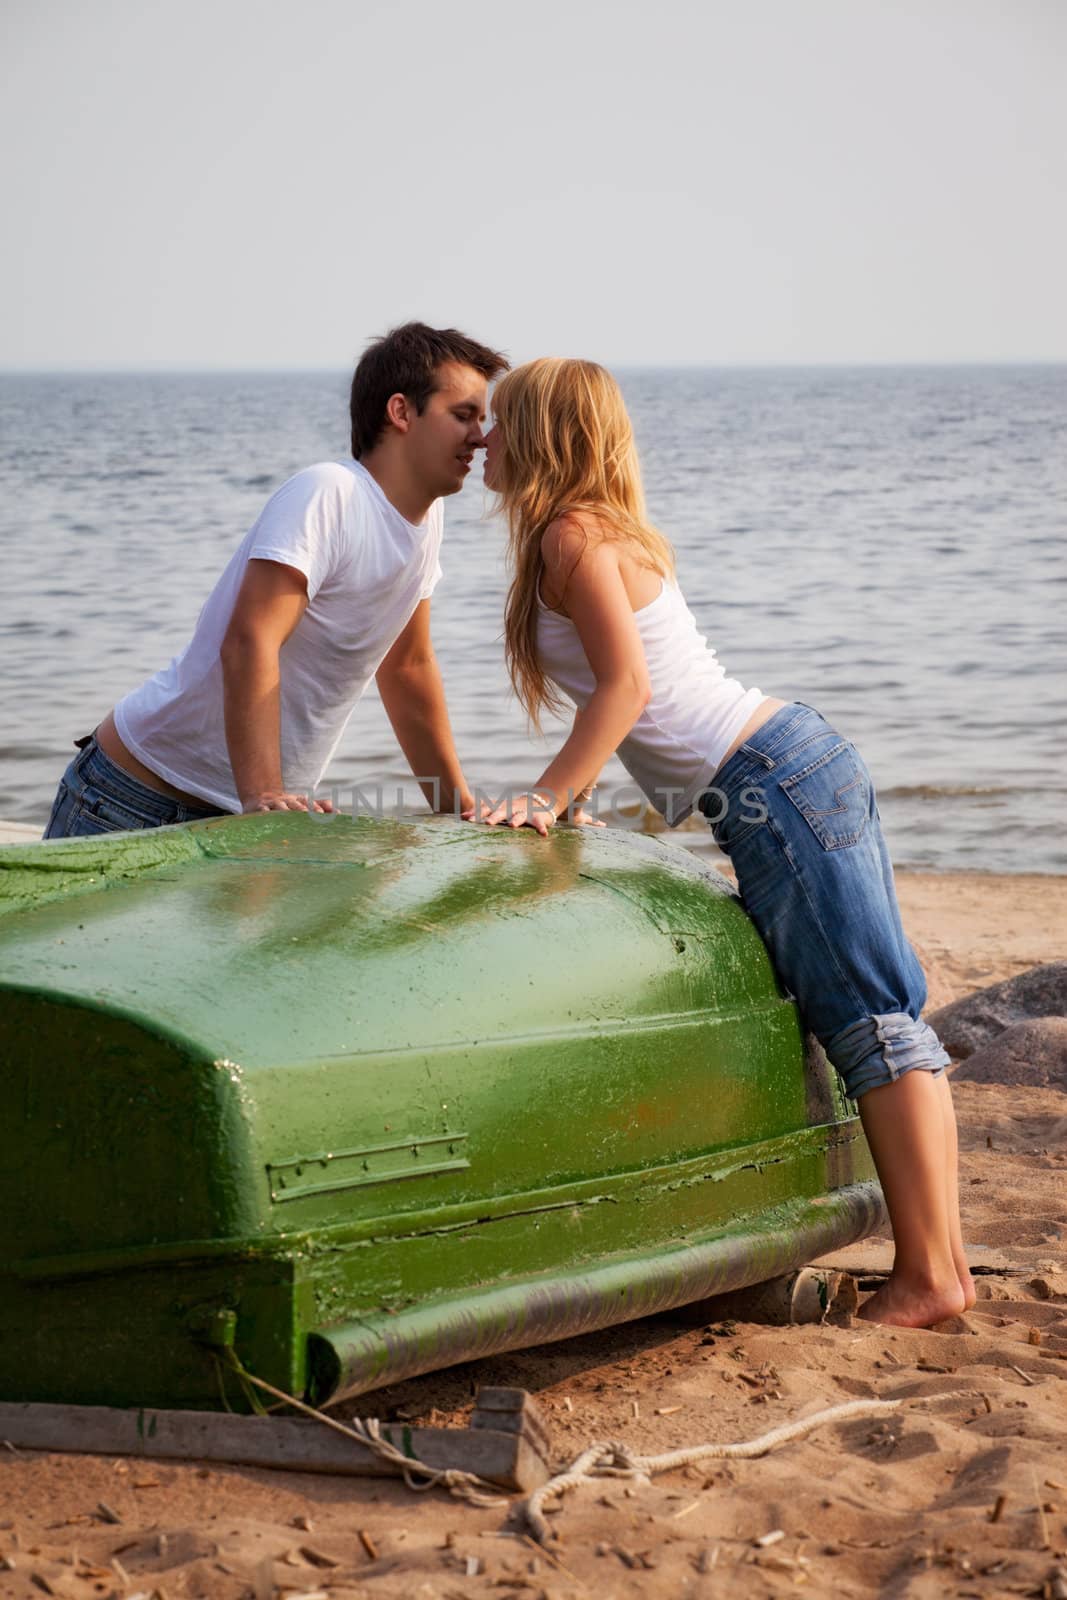 beautiful couple kissing on a beach near old boat